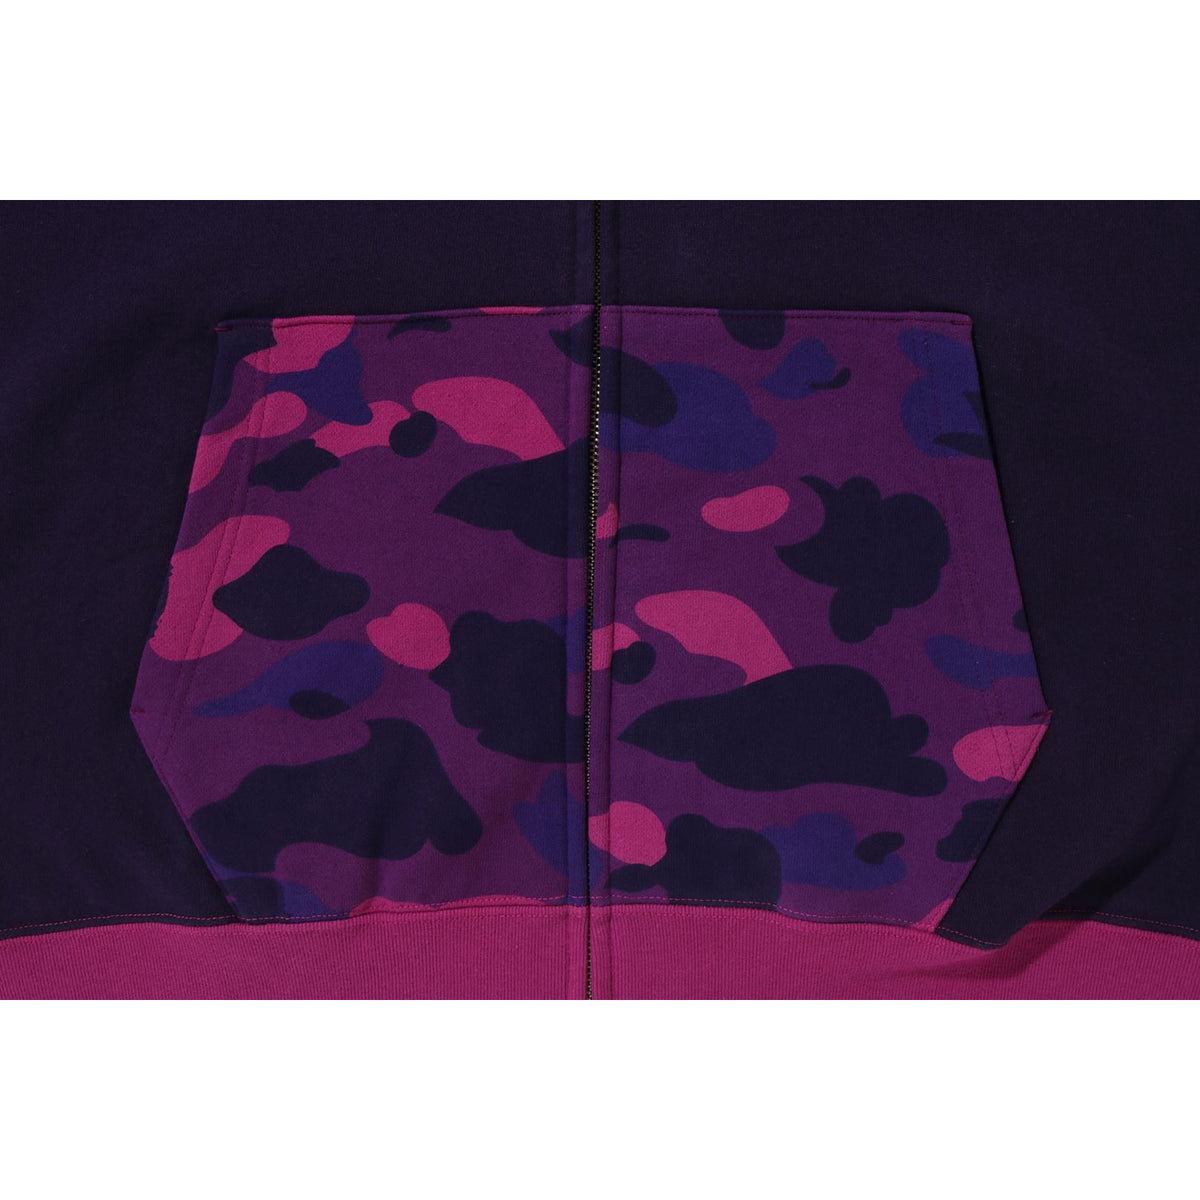 COLOR CAMO RELAXED FIT FULL ZIP HOODIE MENS